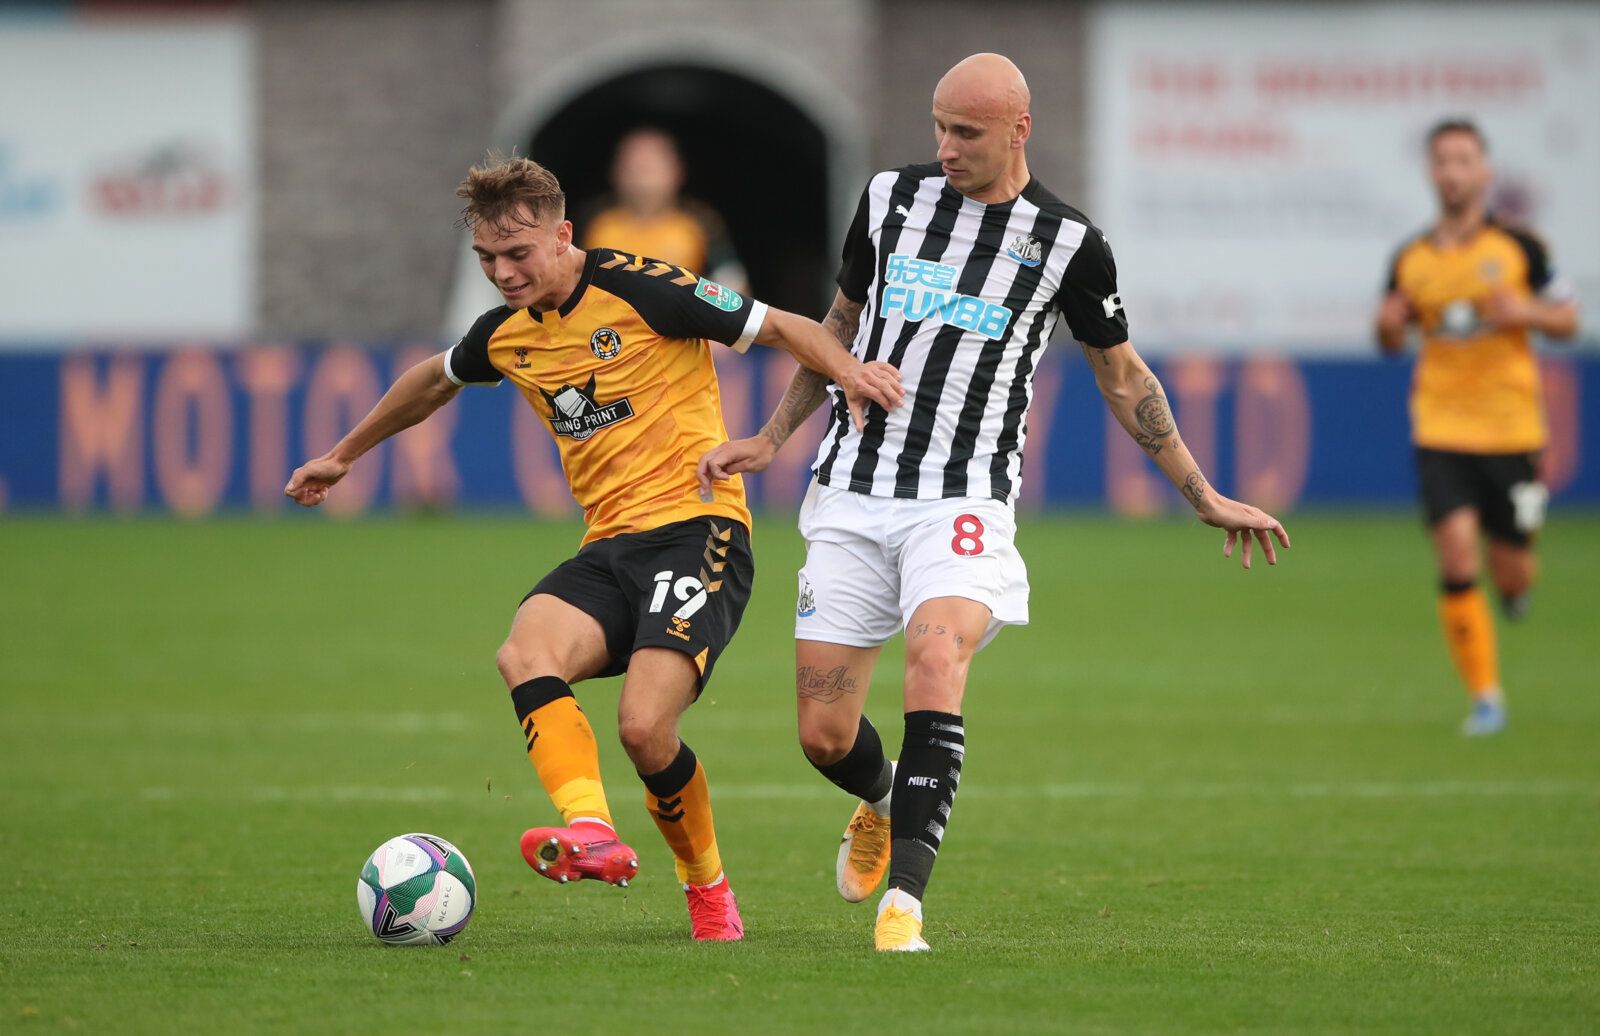 Soccer Football - Carabao Cup Fourth Round - Newport County AFC v Newcastle United - Rodney Parade, Newport, Wales, Britain - September 30, 2020 Newport County's Scott Twine in action with Newcastle United's Jonjo Shelvey Pool via REUTERS/Nick Potts EDITORIAL USE ONLY. No use with unauthorized audio, video, data, fixture lists, club/league logos or 'live' services. Online in-match use limited to 75 images, no video emulation. No use in betting, games or single club /league/player publications.  